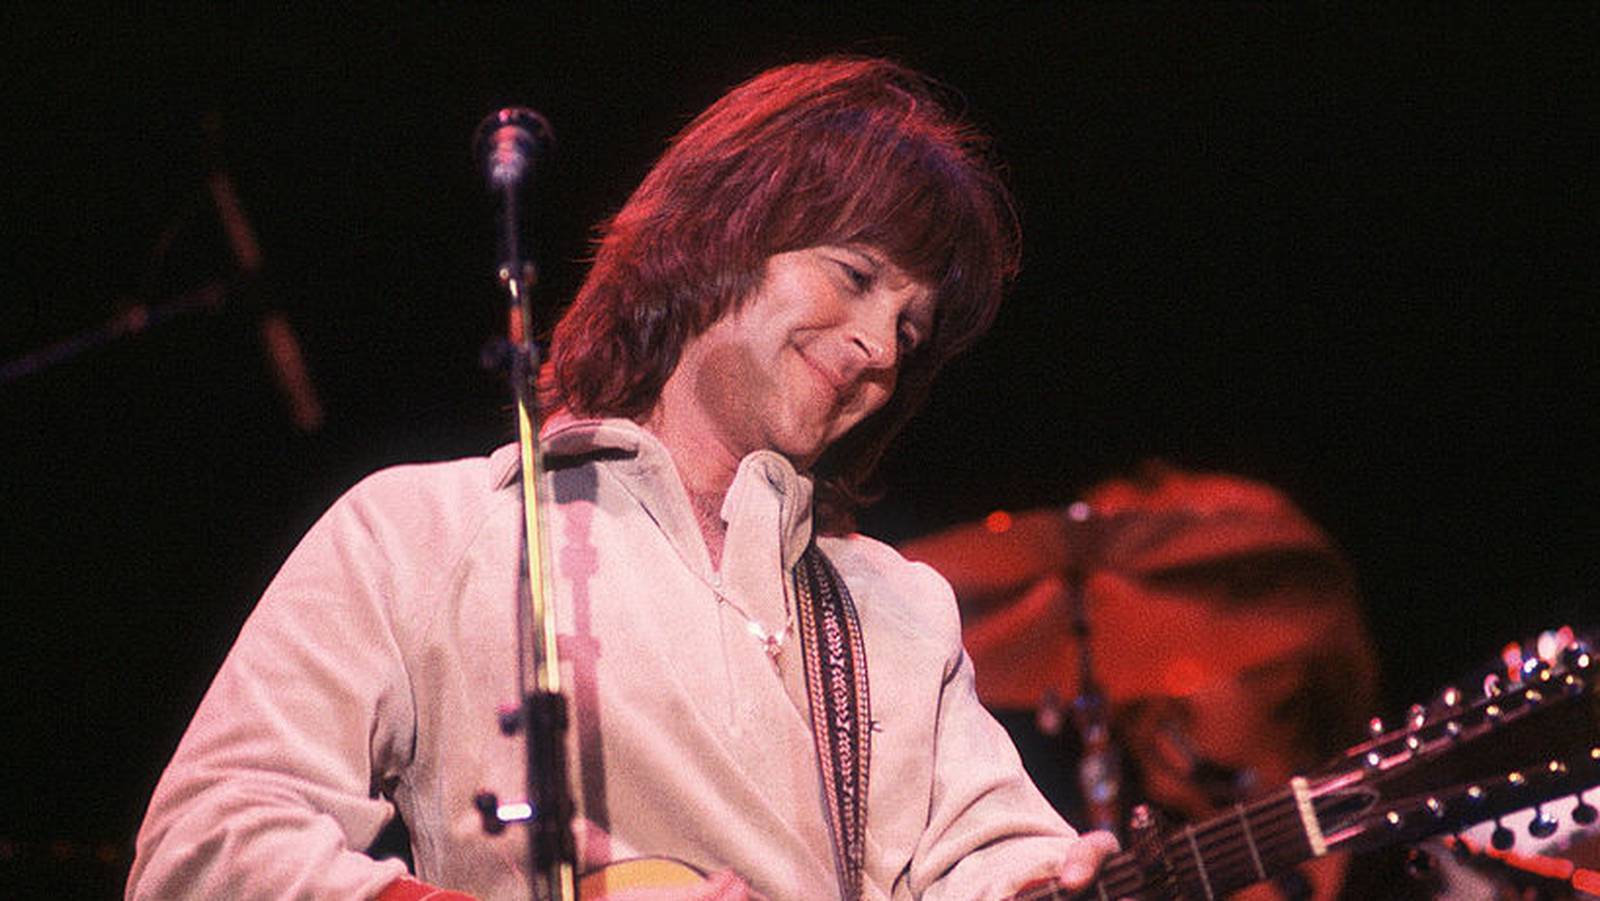 The Eagles founding member, ‘Take It to the Limit’ singer, Randy